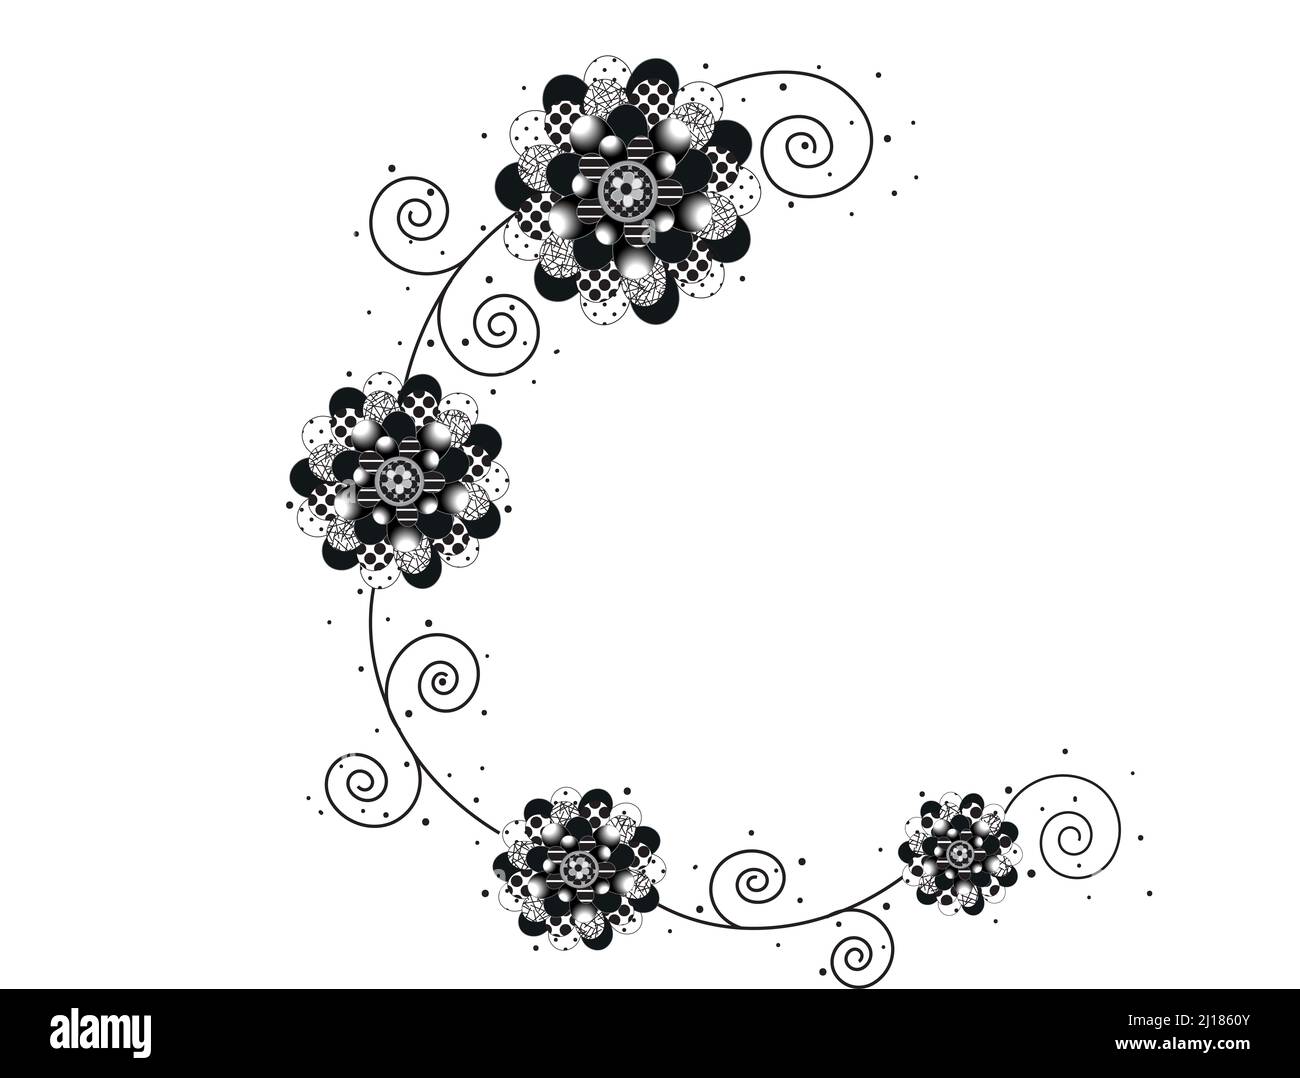 Unique Black and White Patterns in Motif and another spiral design isolated on white background Stock Photo